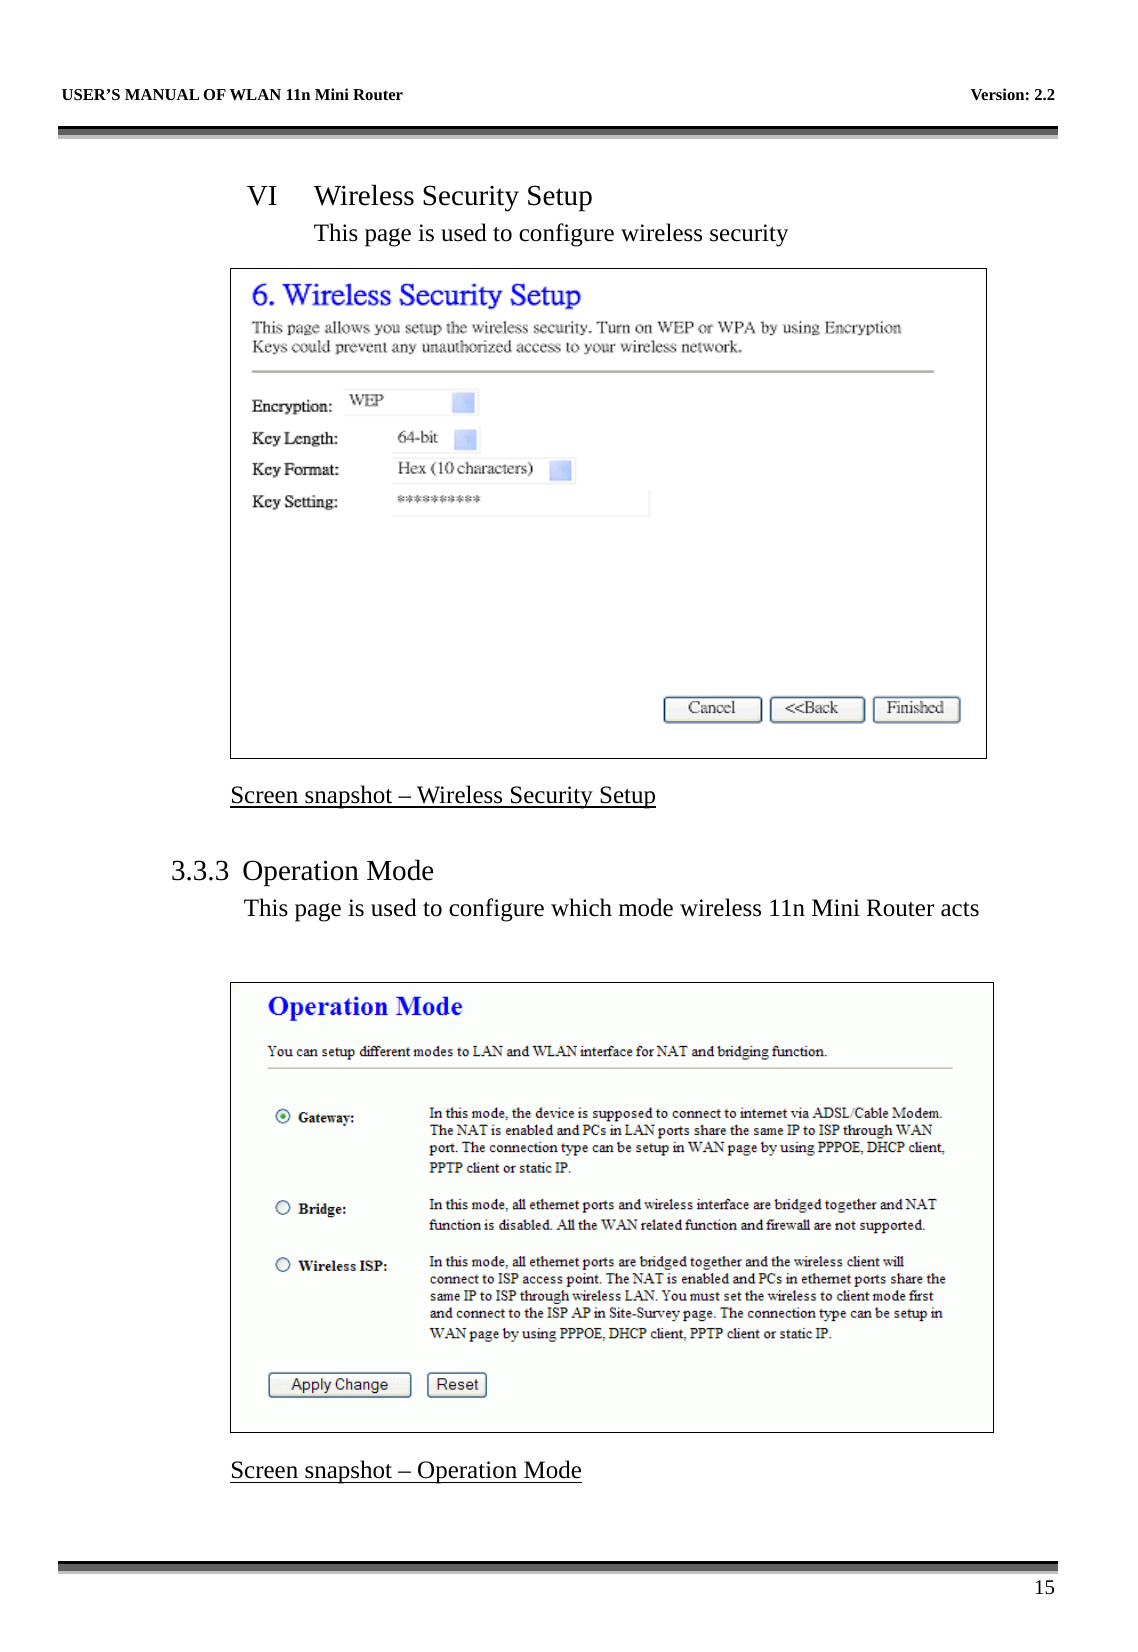   USER’S MANUAL OF WLAN 11n Mini Router    Version: 2.2      15  VI  Wireless Security Setup This page is used to configure wireless security  Screen snapshot – Wireless Security Setup  3.3.3 Operation Mode This page is used to configure which mode wireless 11n Mini Router acts   Screen snapshot – Operation Mode  